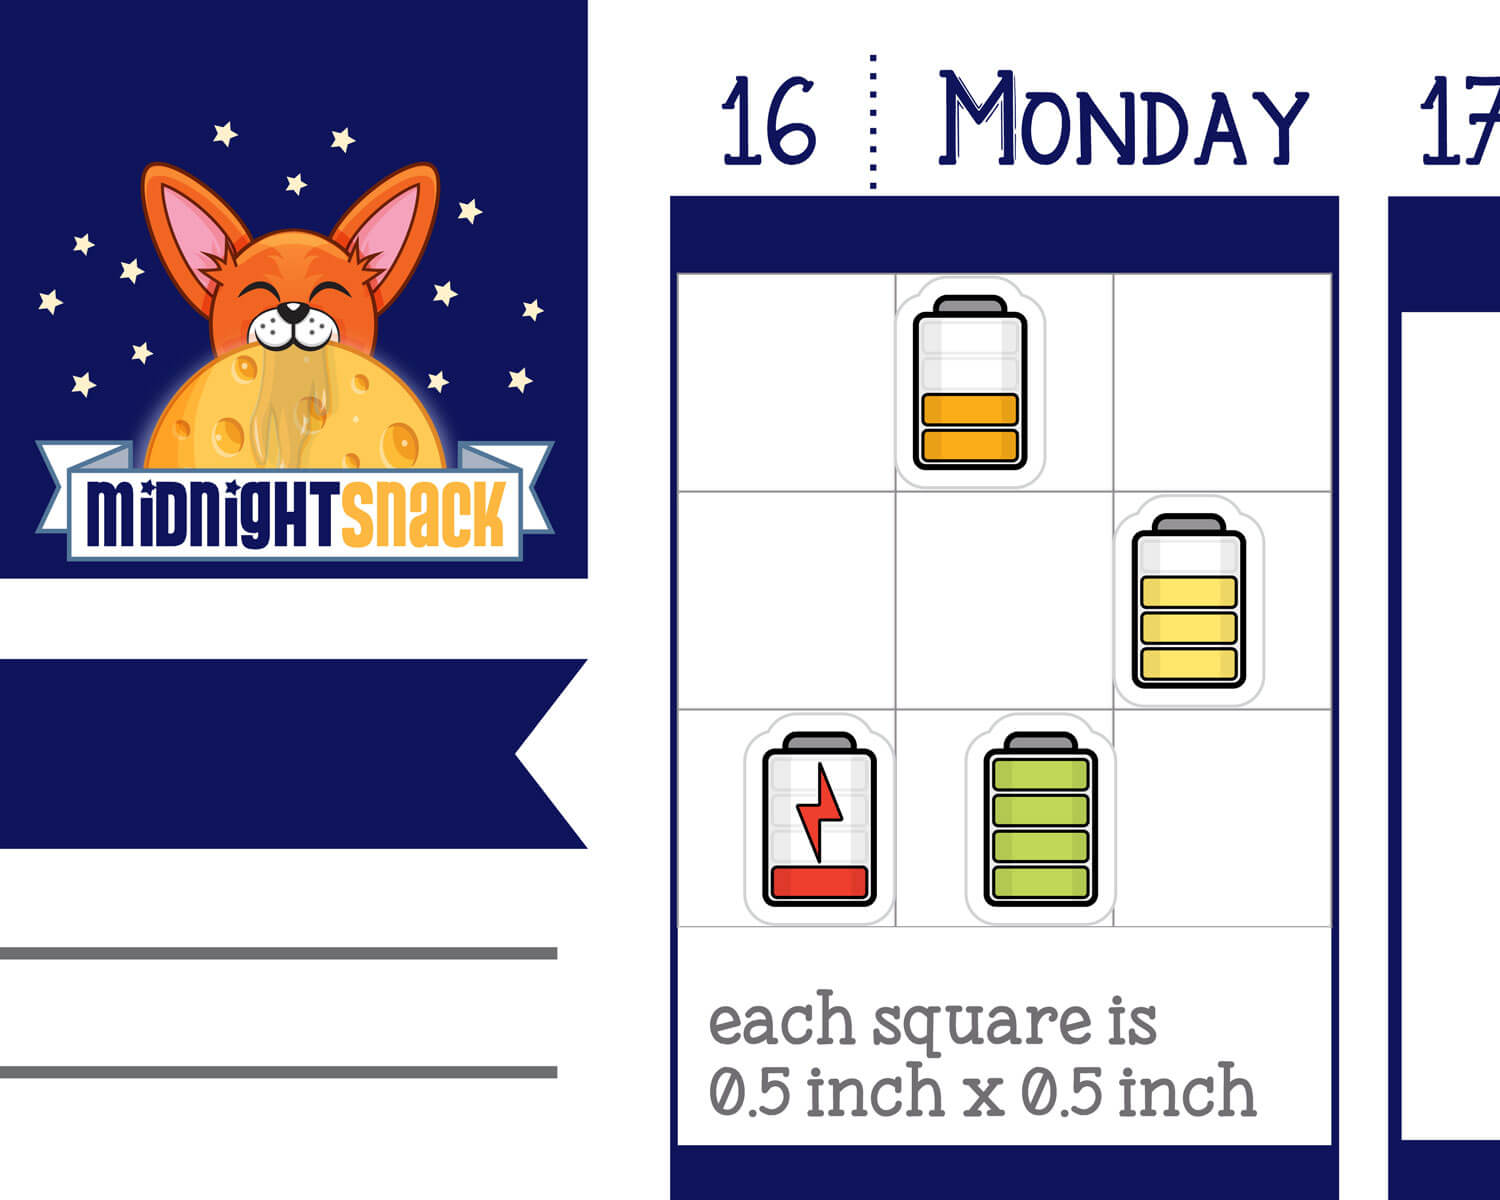 Charge Battery Planner Stickers from Midnight Snack Planner